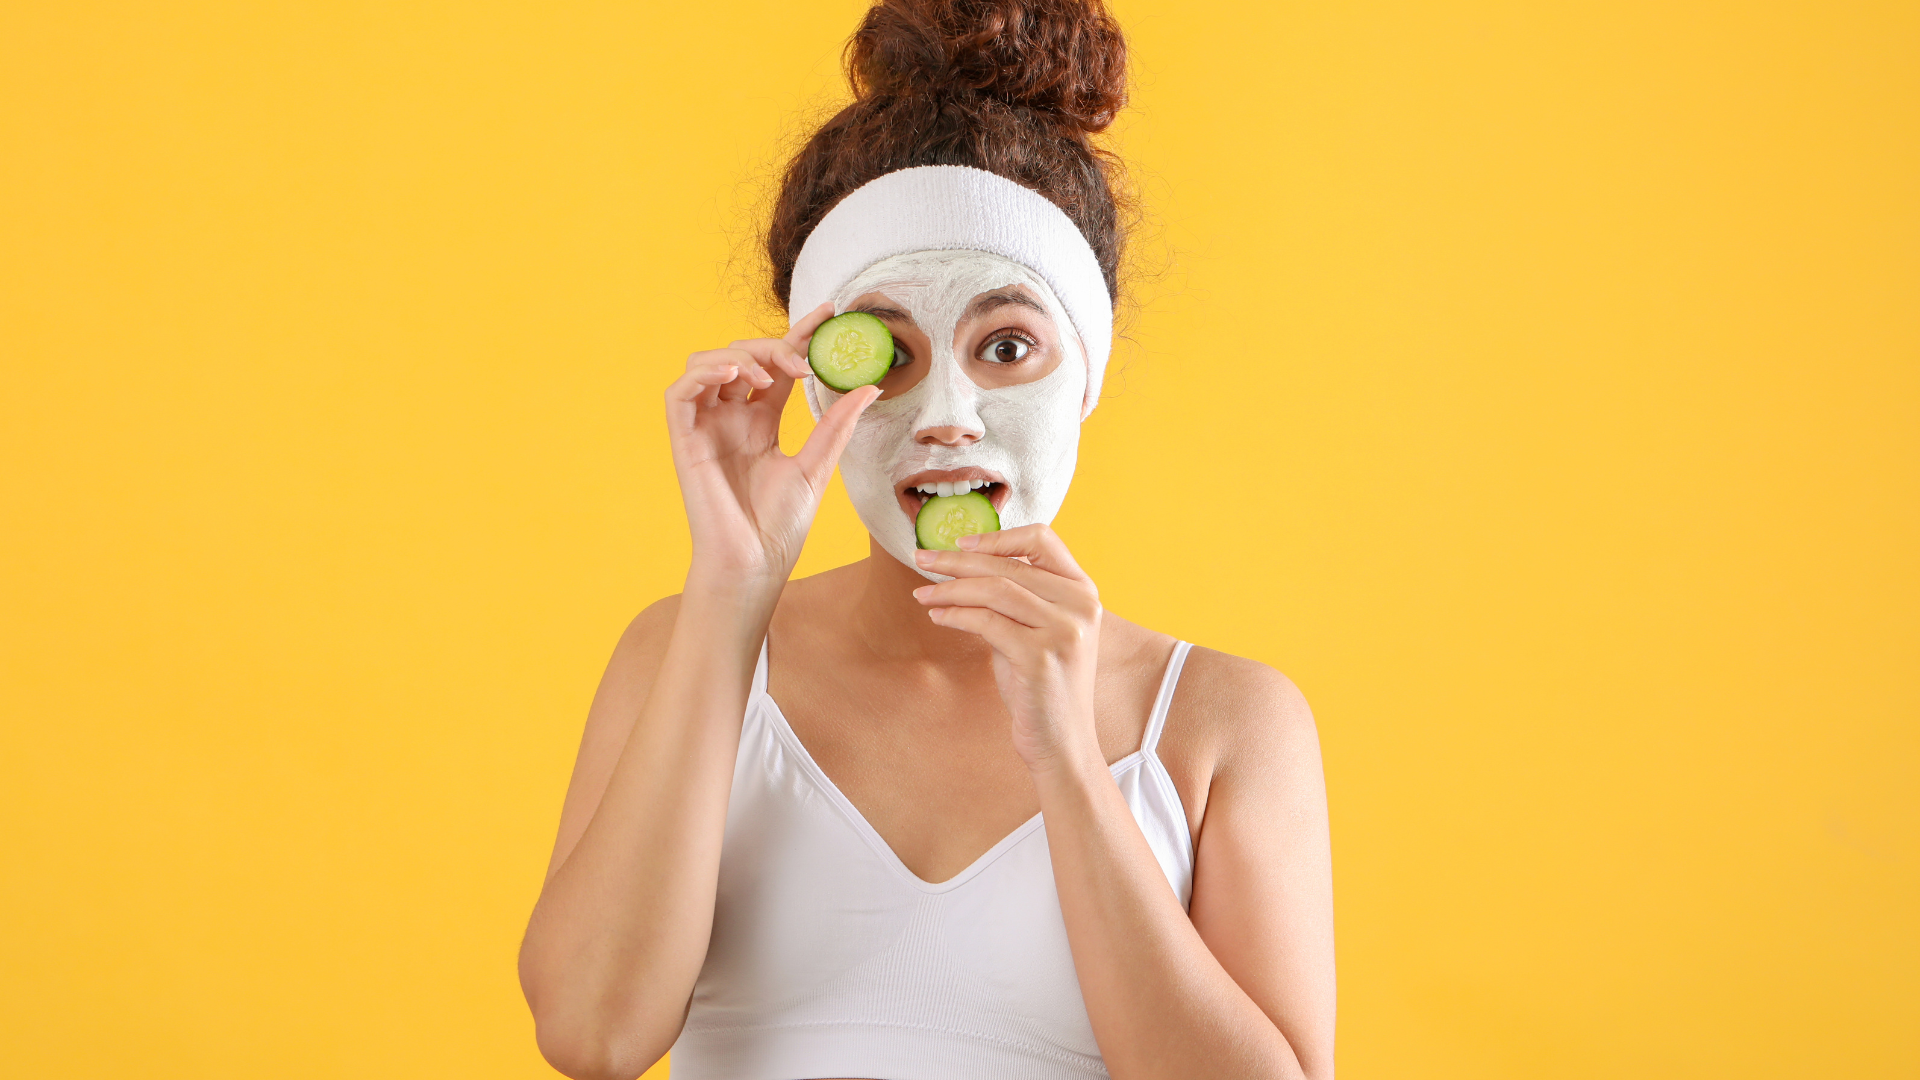 10 Minutes To Better Skin: The End Of Procrastinating On Your Beauty Routine